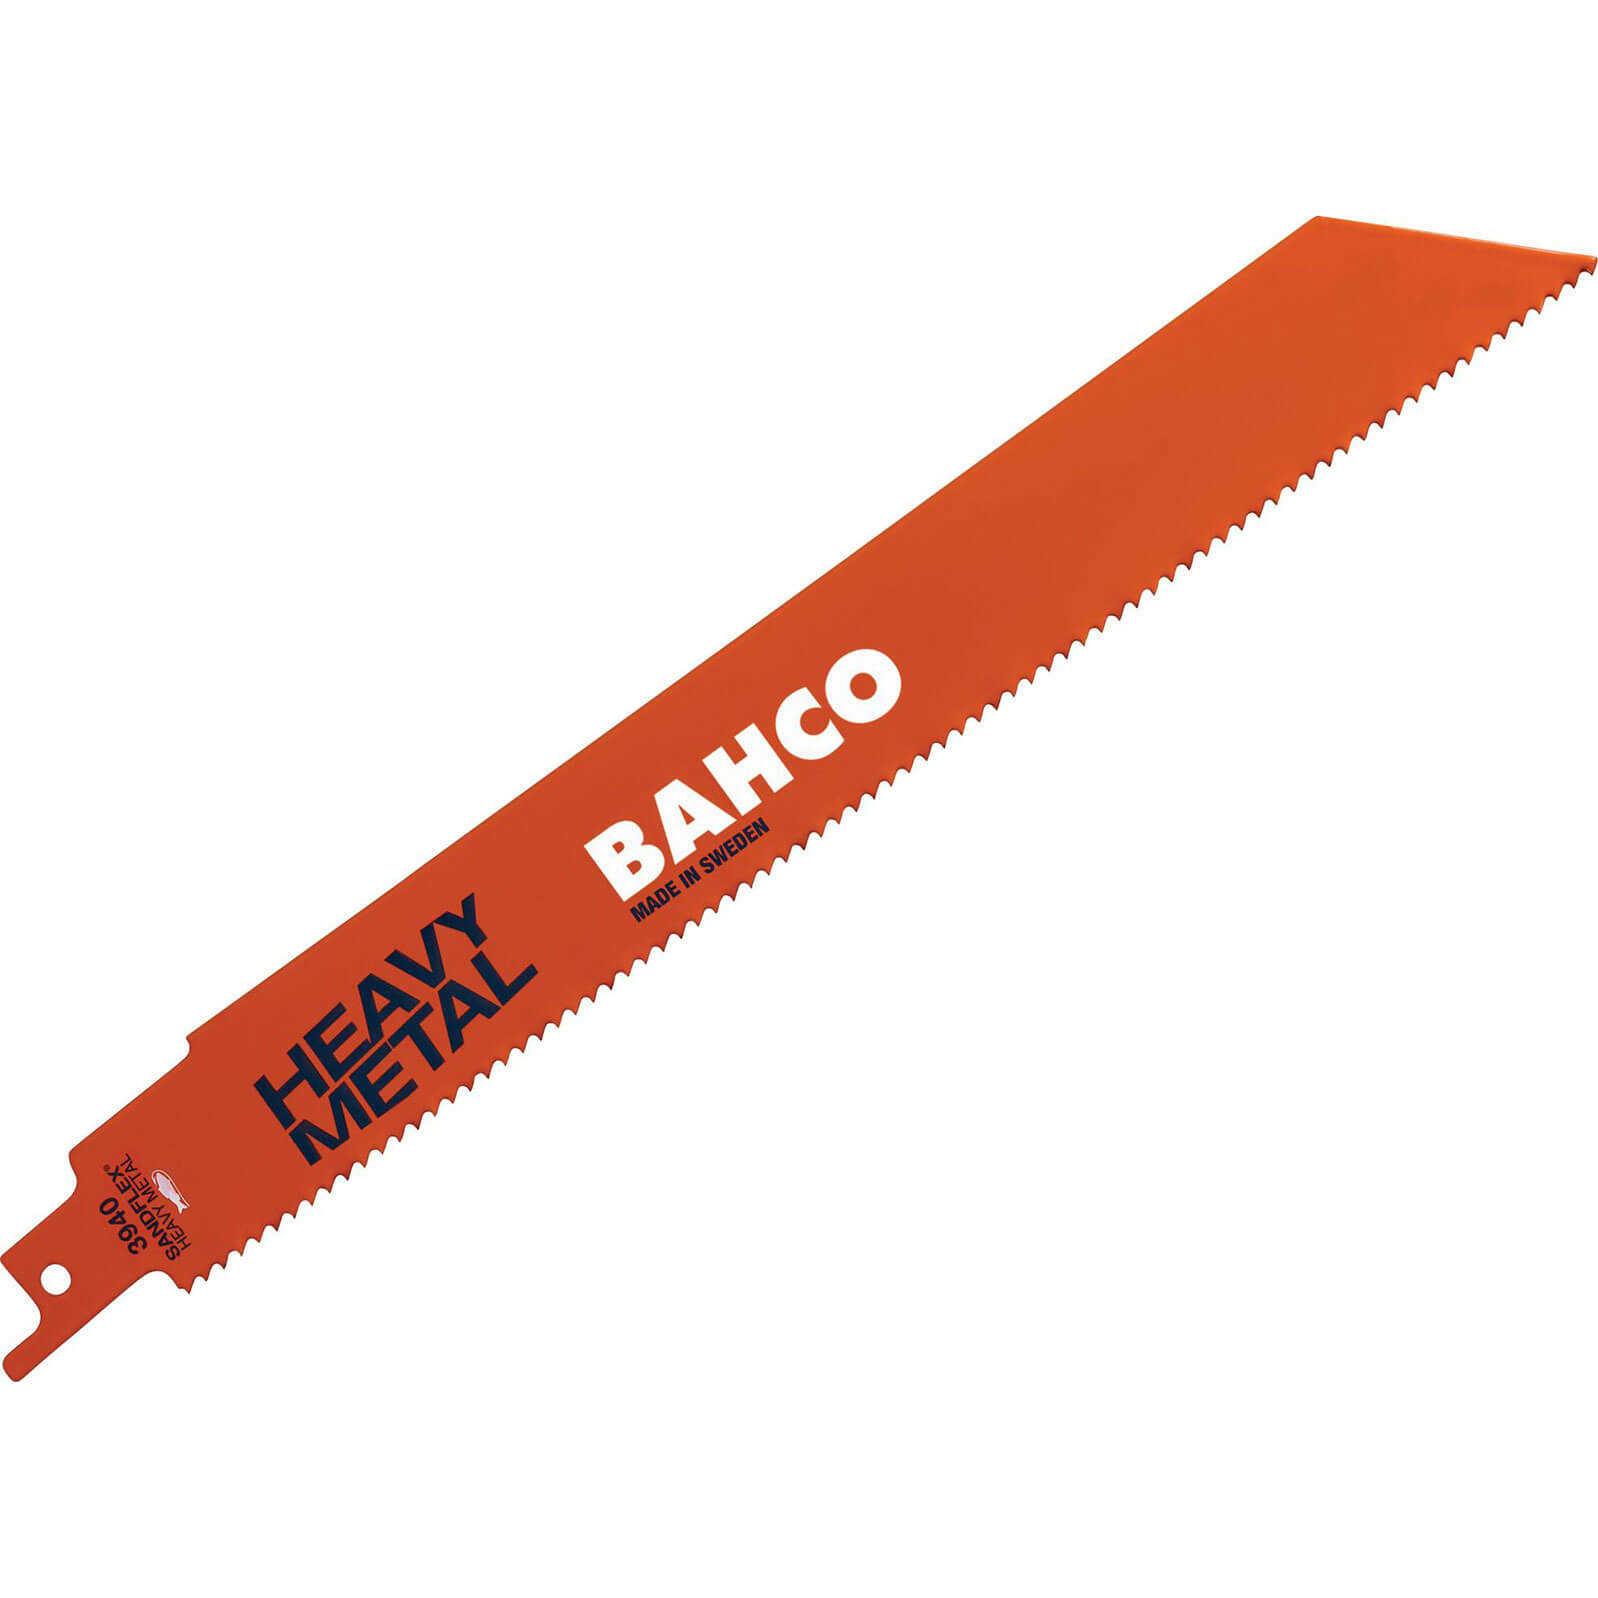 Image of Bahco Heavy Metal 18TPI Reciprocating Sabre Saw Blades 150mm Pack of 5